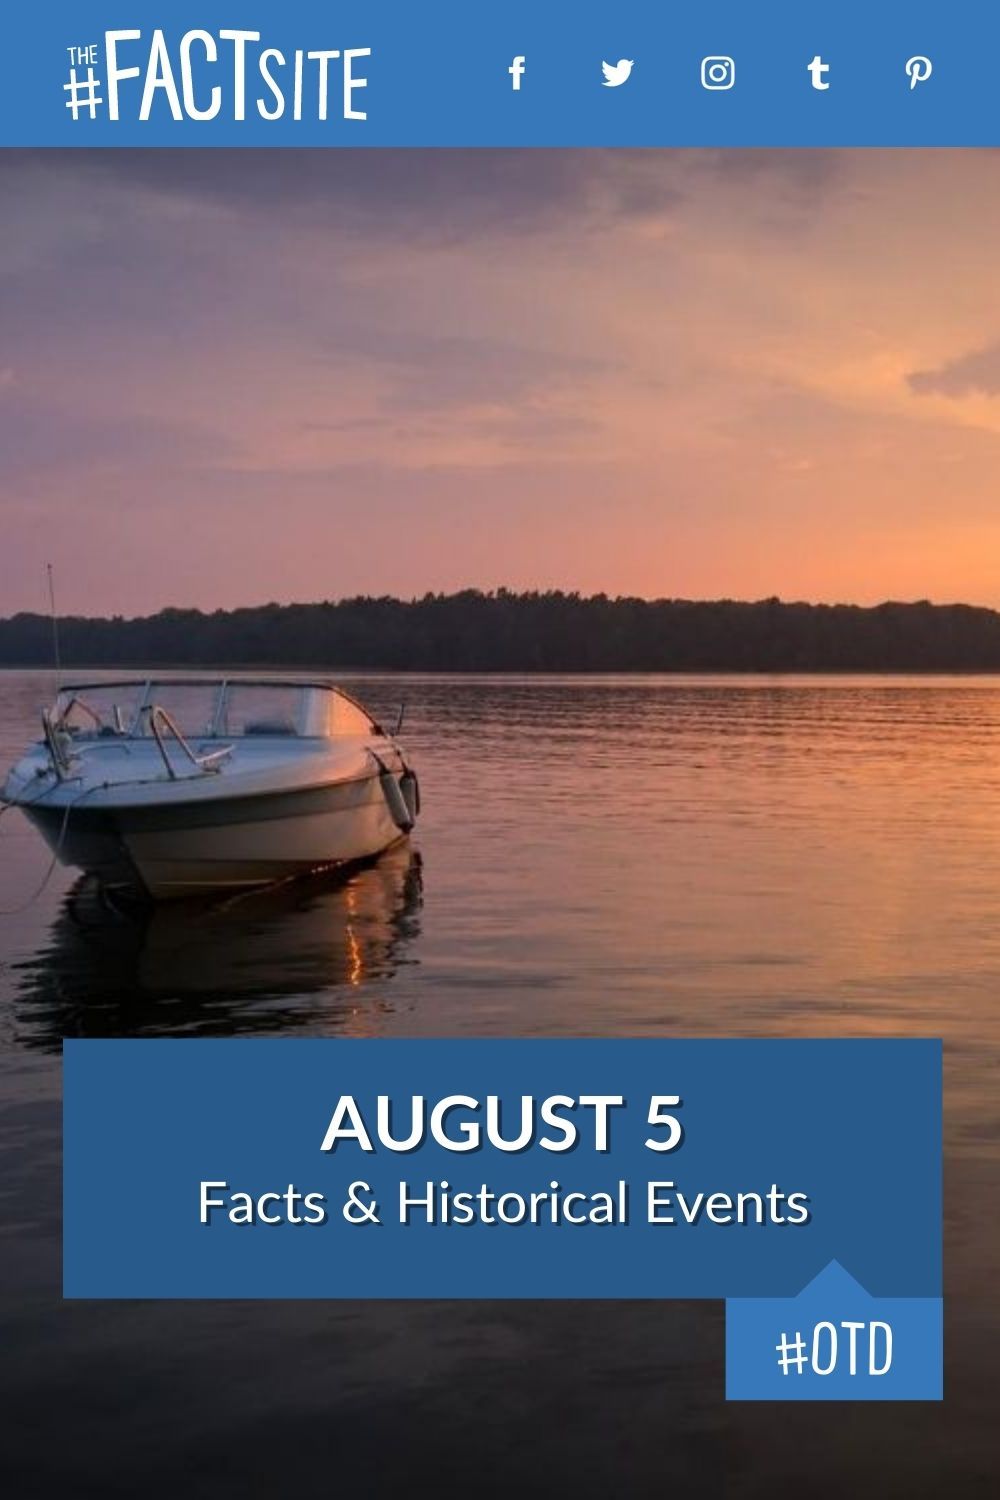 Facts & Historic Events That Happened on August 5